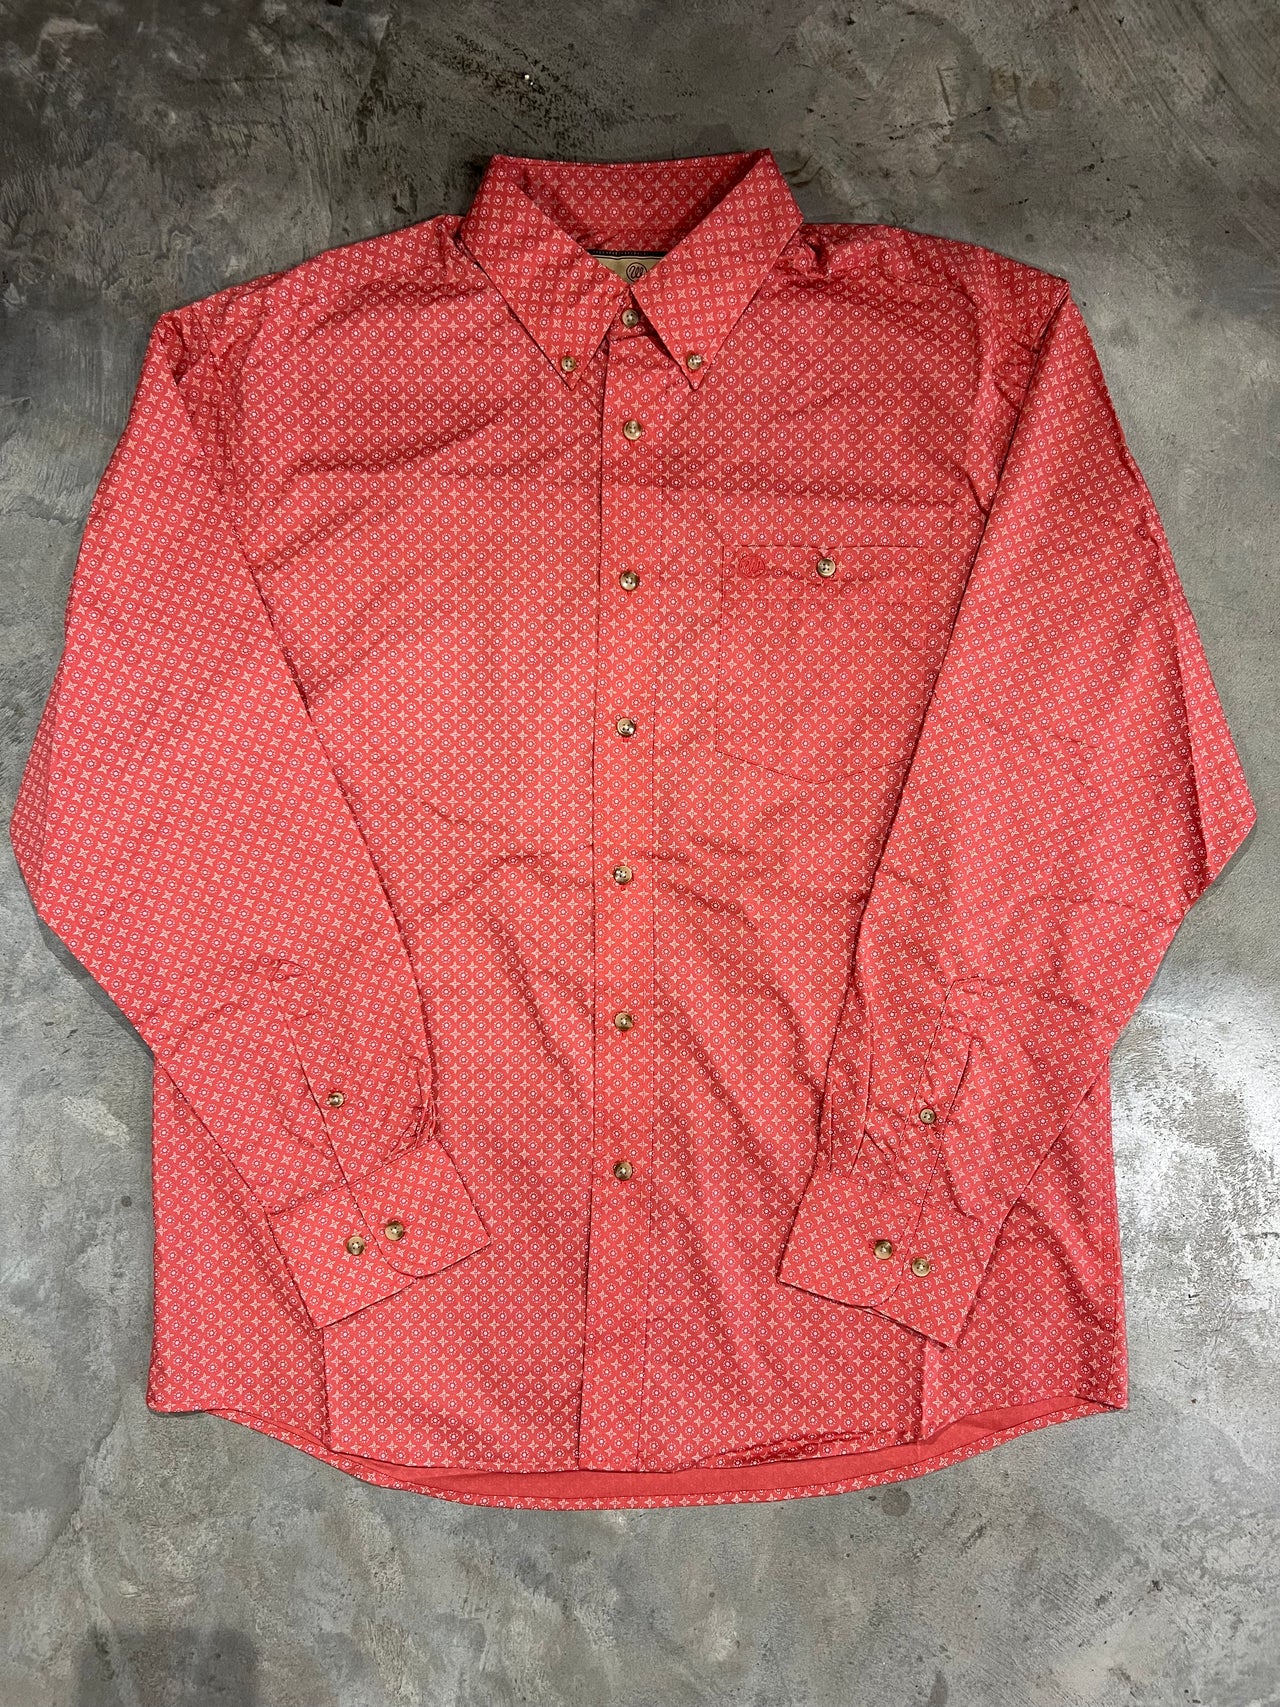 Wrangler Diamond Printed Washed Red Classic LS Button Down